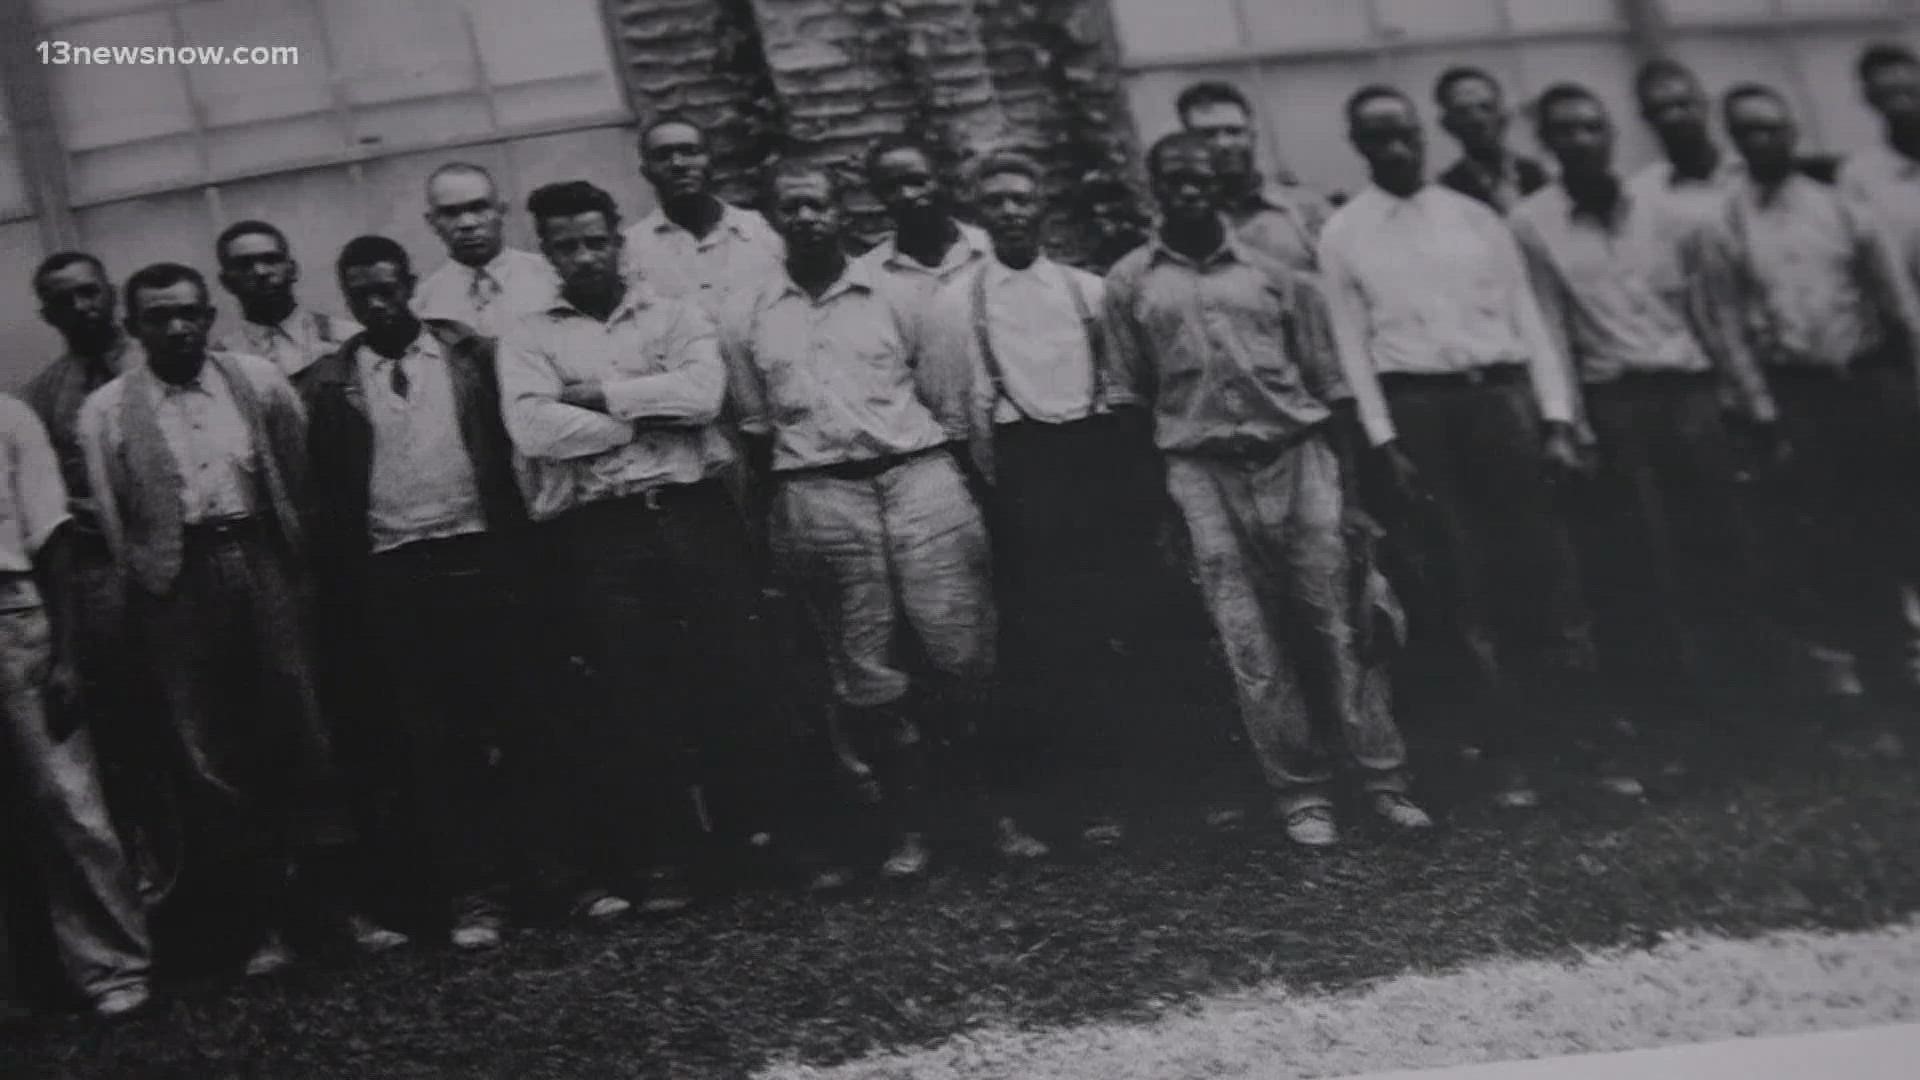 In 2021, the museum sought to identify 21 previously unidentified African American men from an archived photograph, depicting men who had helped construct the museum